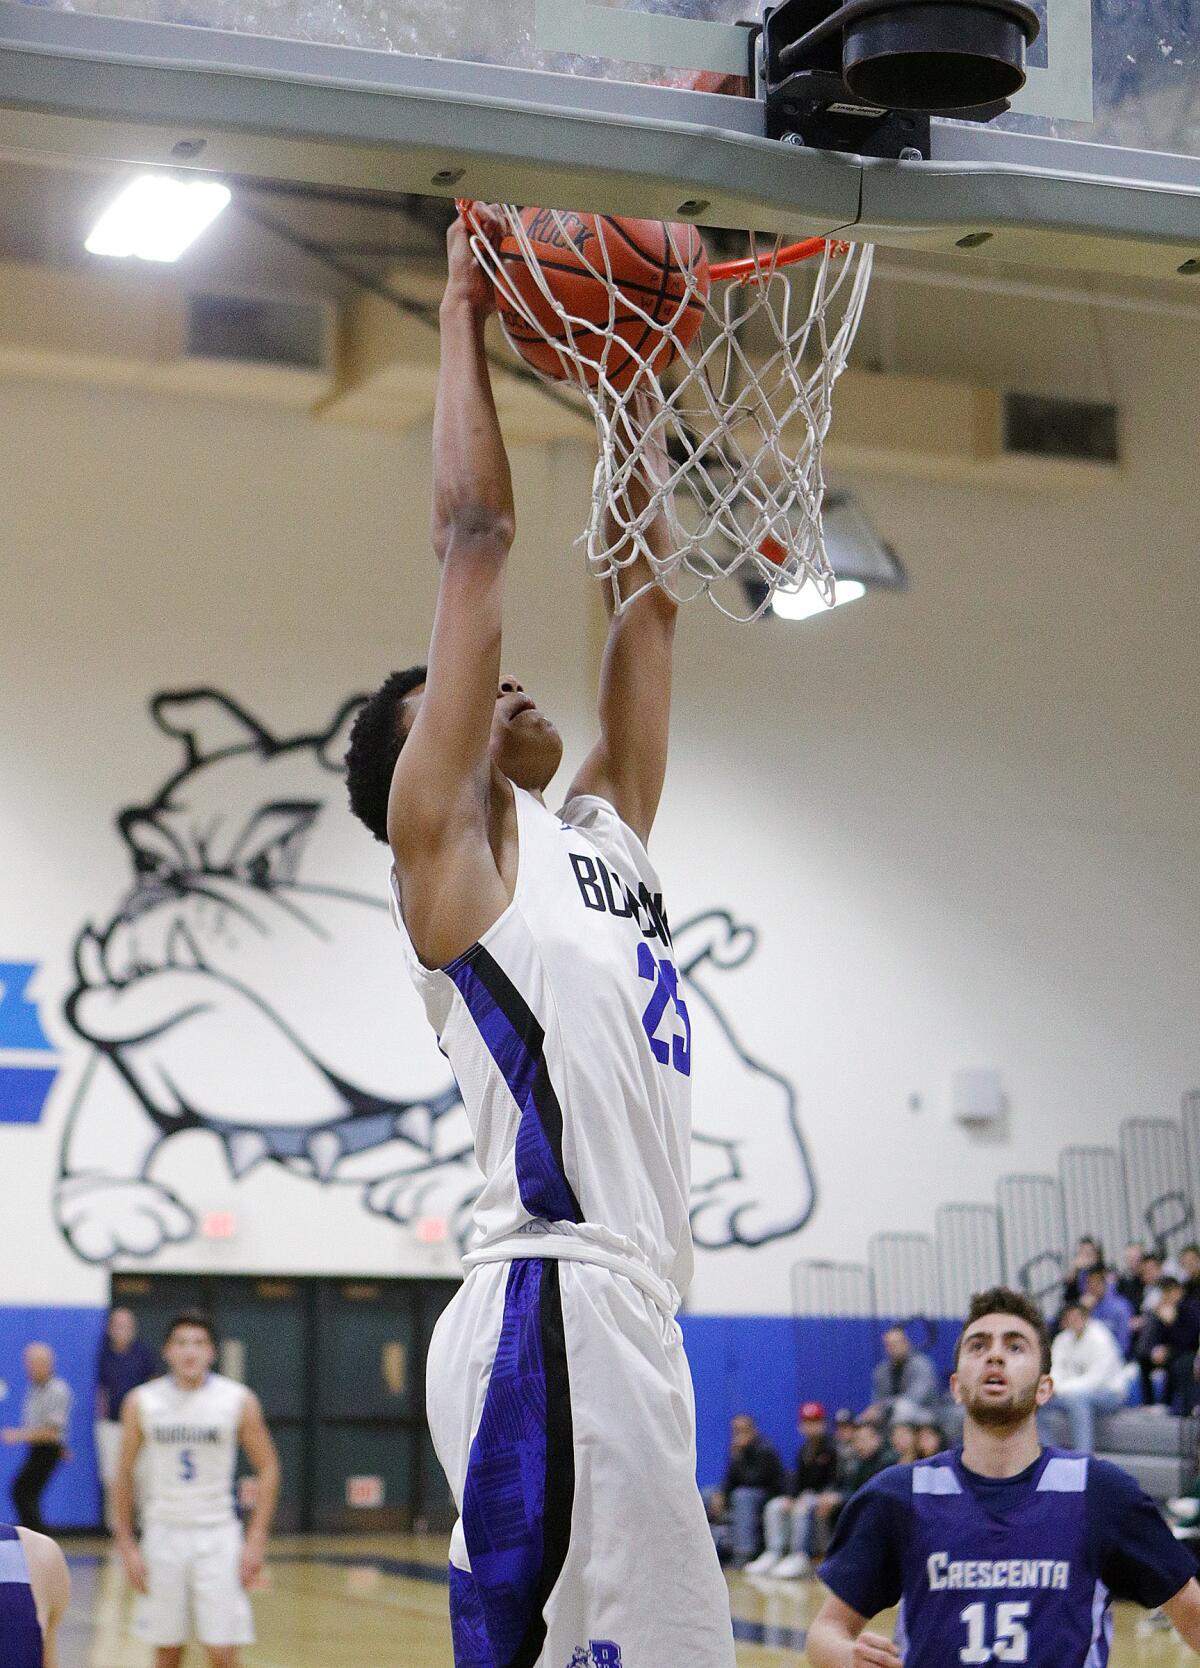 Burbank's Abiel Pearl turns with a steal and dunks it against Crescenta Valley in a Pacific League boys' basketball game at Burbank High School on Thursday, December 19, 2019.